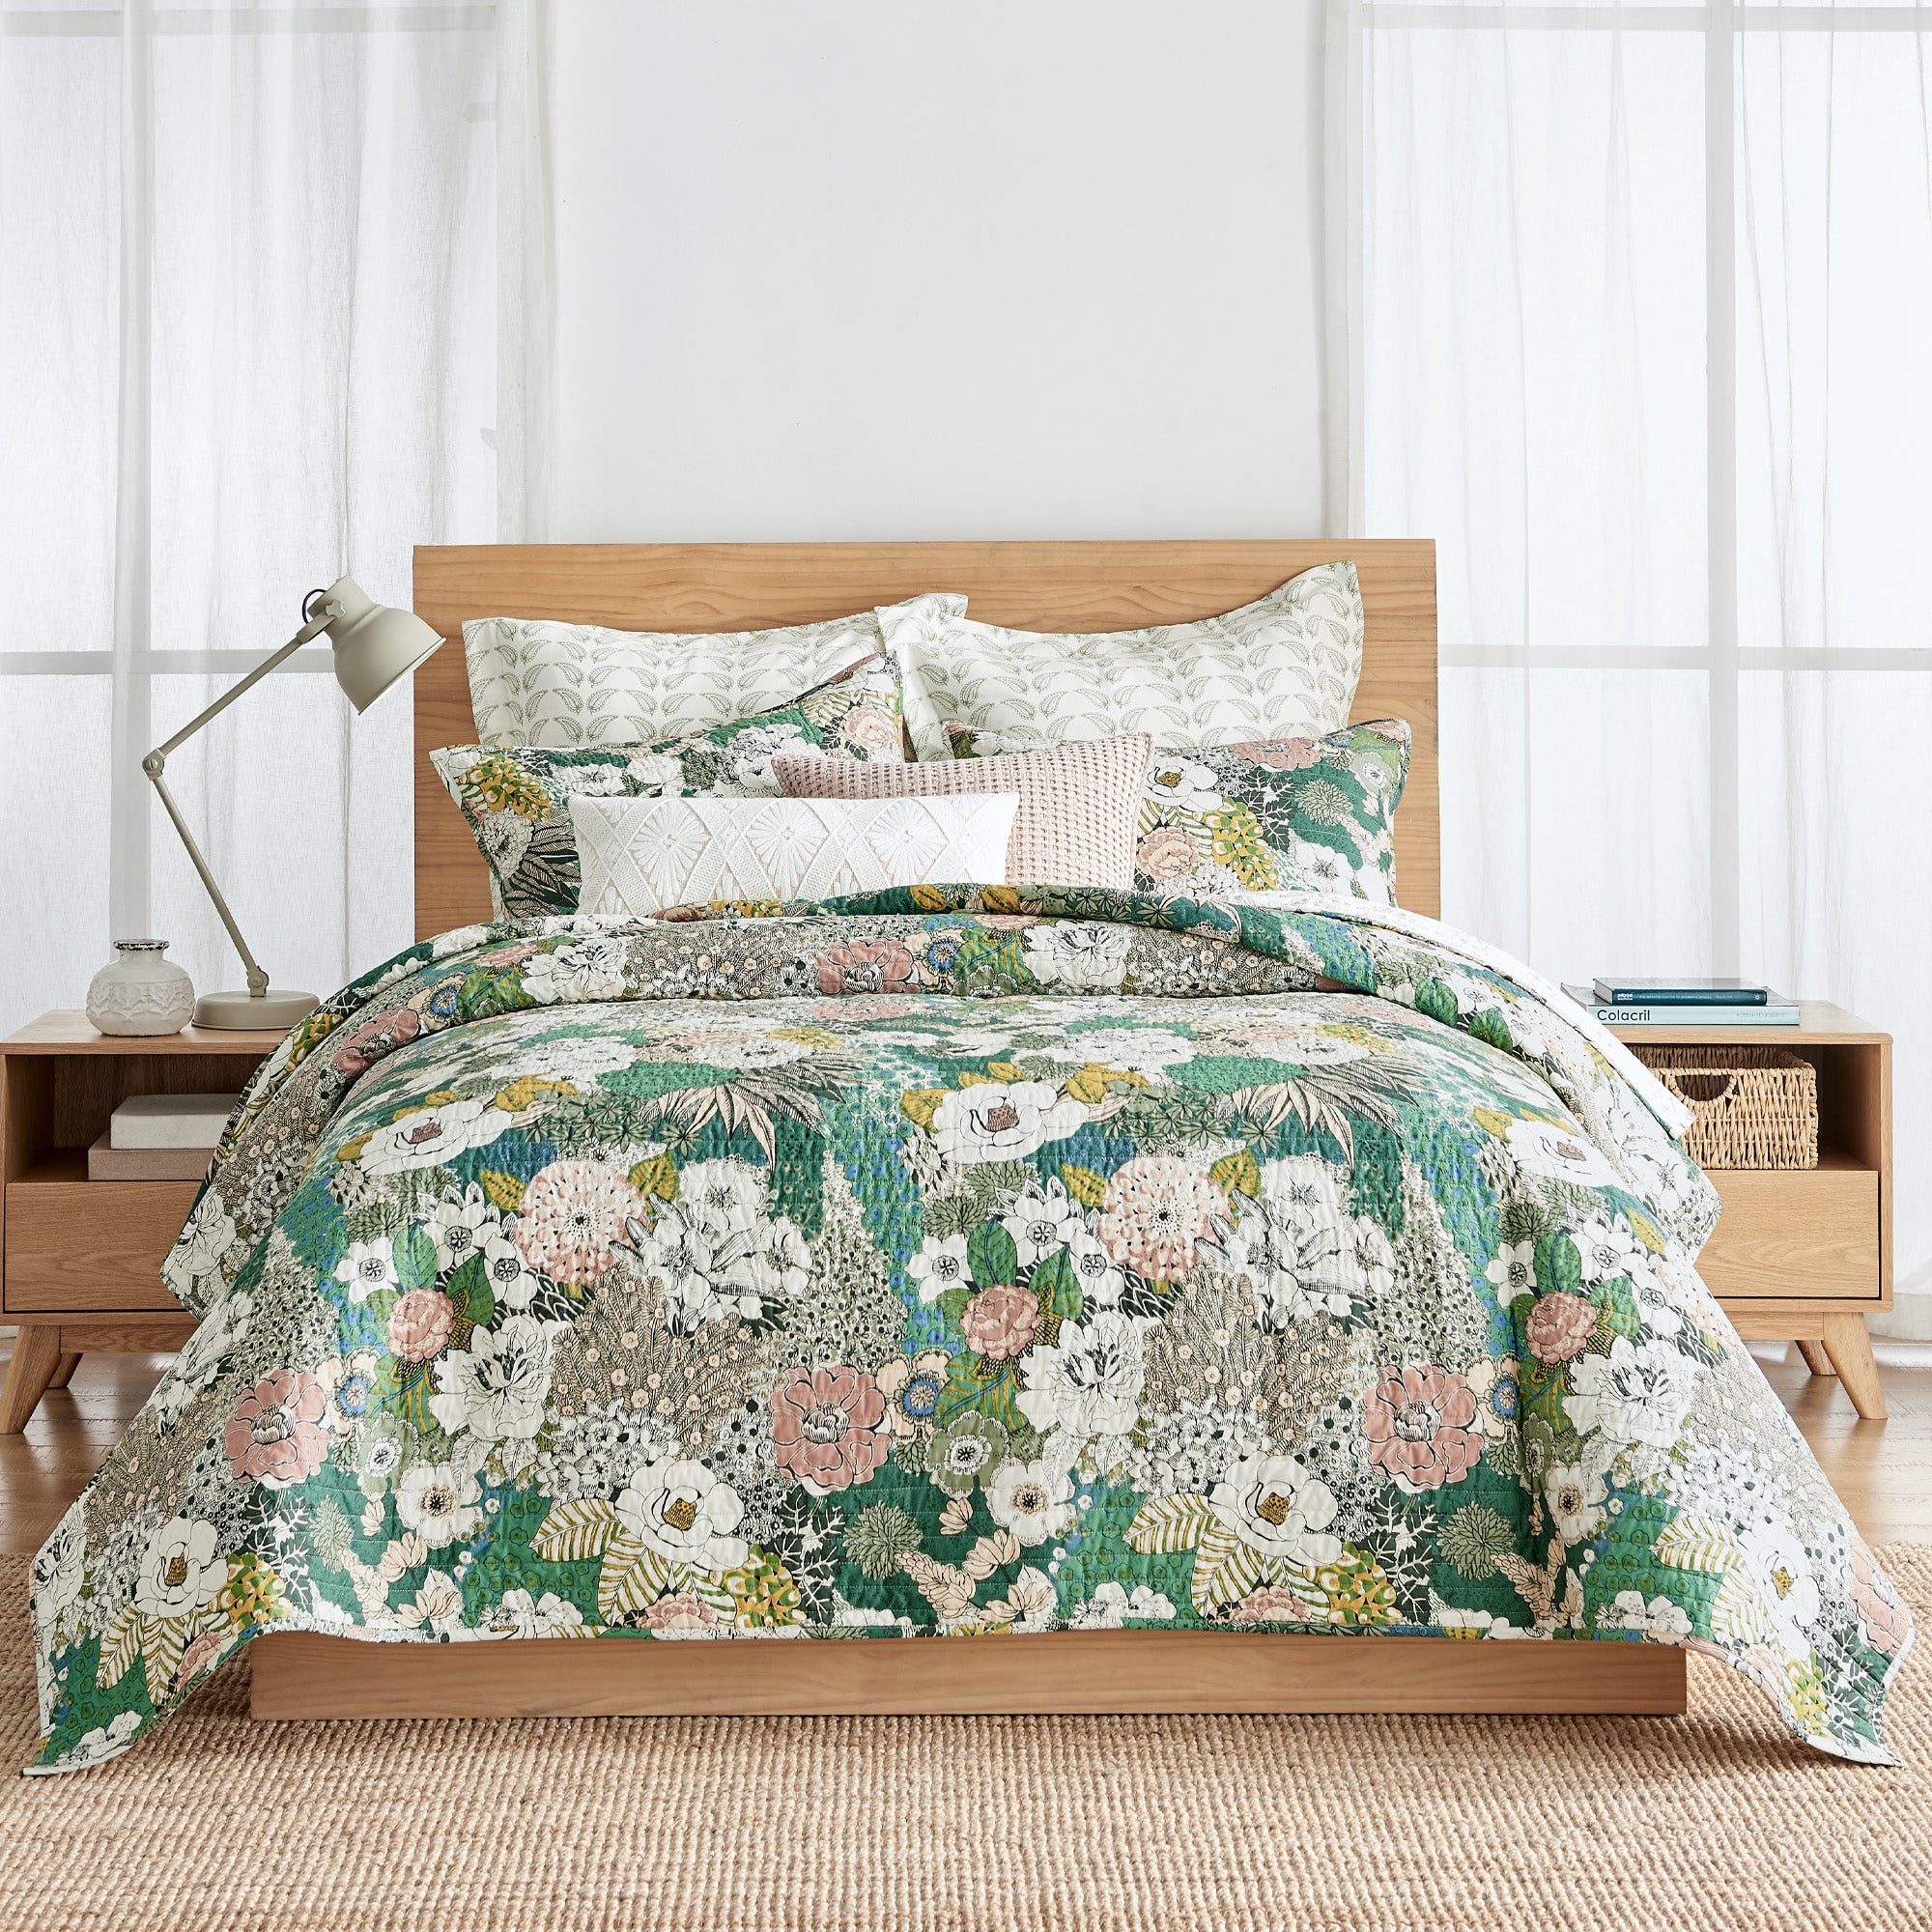 Levtex Home - Grandiflora Quilt Set - Full/Queen Quilt + Two Standard  Pillow Shams - Multicolor Bold Contemporary Floral - Quilt Size (88x92in.)  and